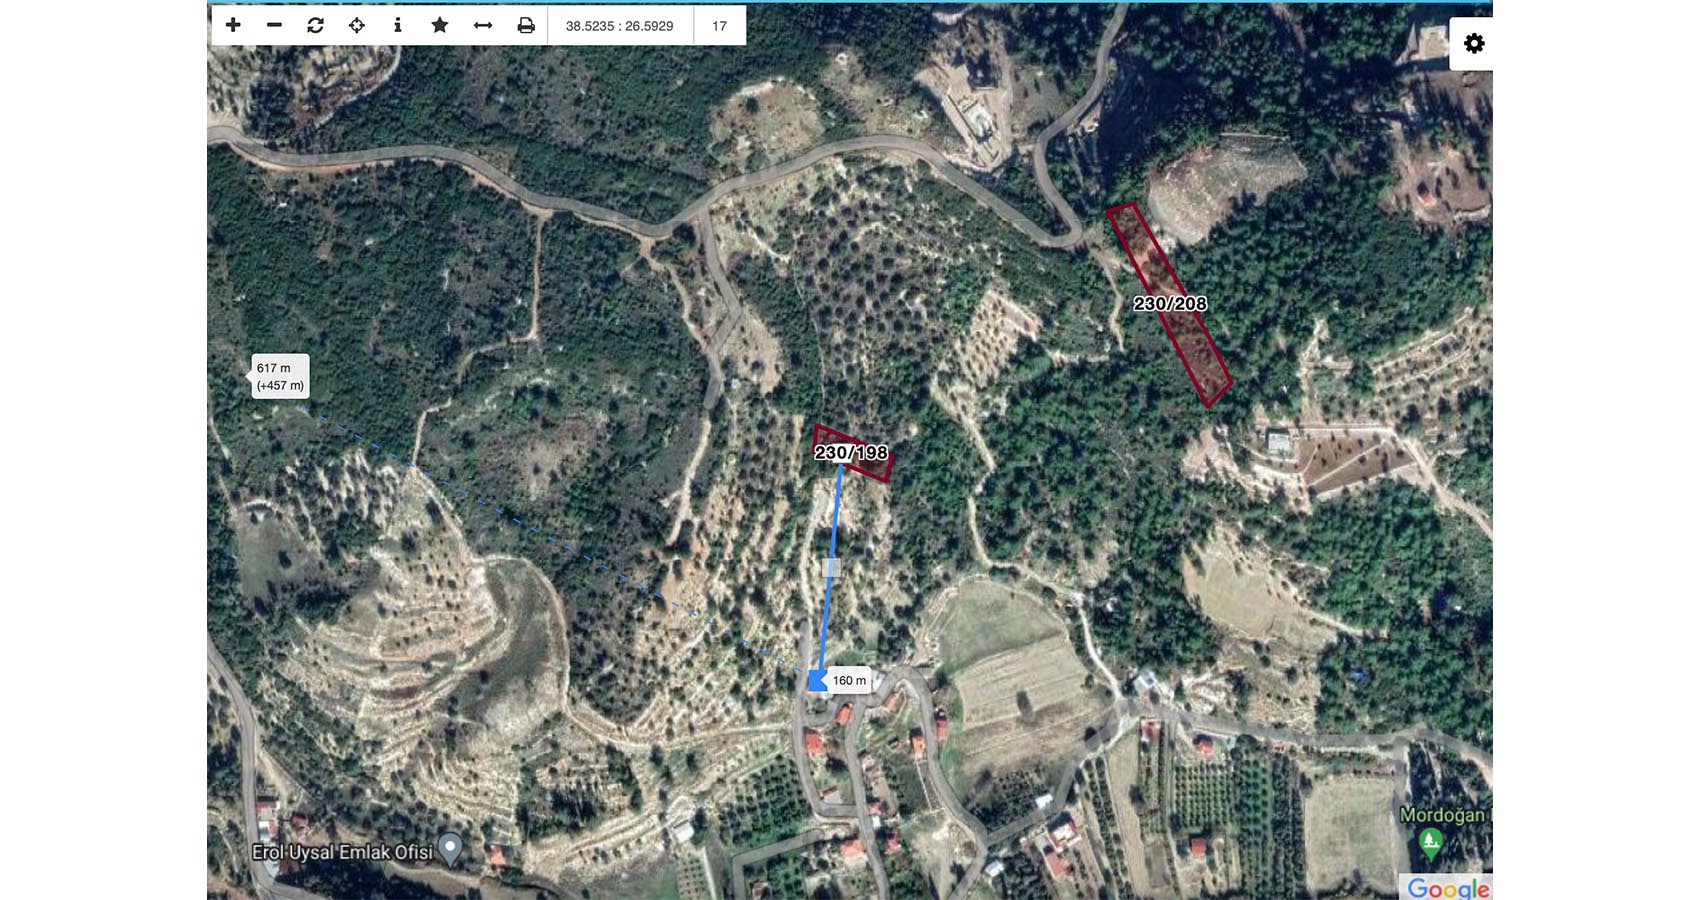 1016.12 m2 plot with space for 5 Luxury Sea View Villas Izmir/plot / DIRECT FROM STATE